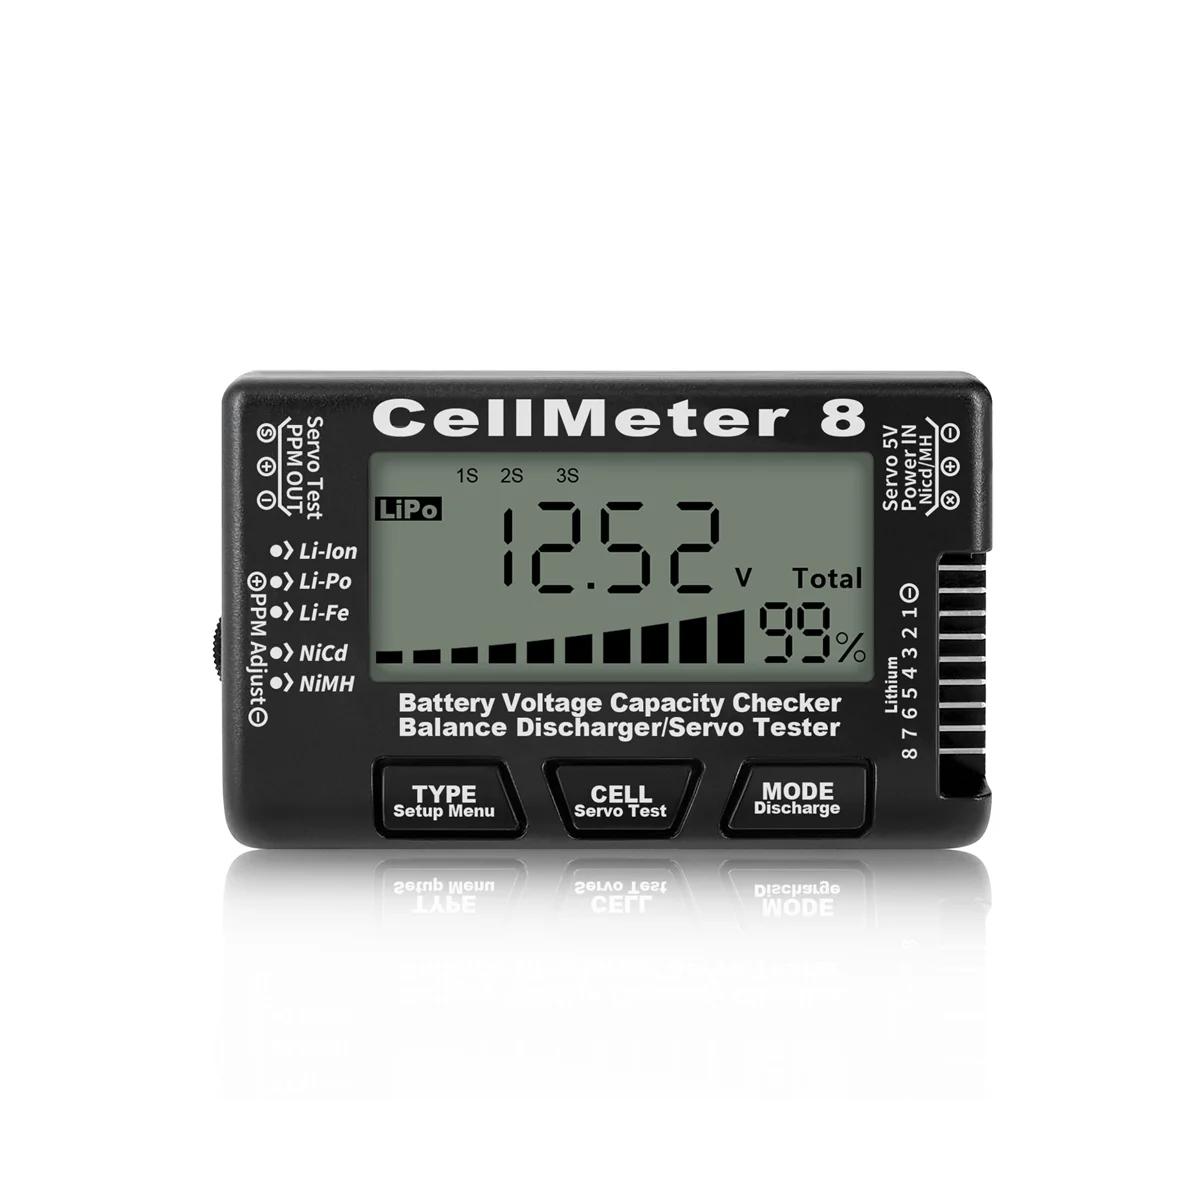 

RC Cellmeter 8 Digital Battery Capacity Checker Controller Tester Voltage Tester for Li-Ion NiMH Nicd Cell Meter Black